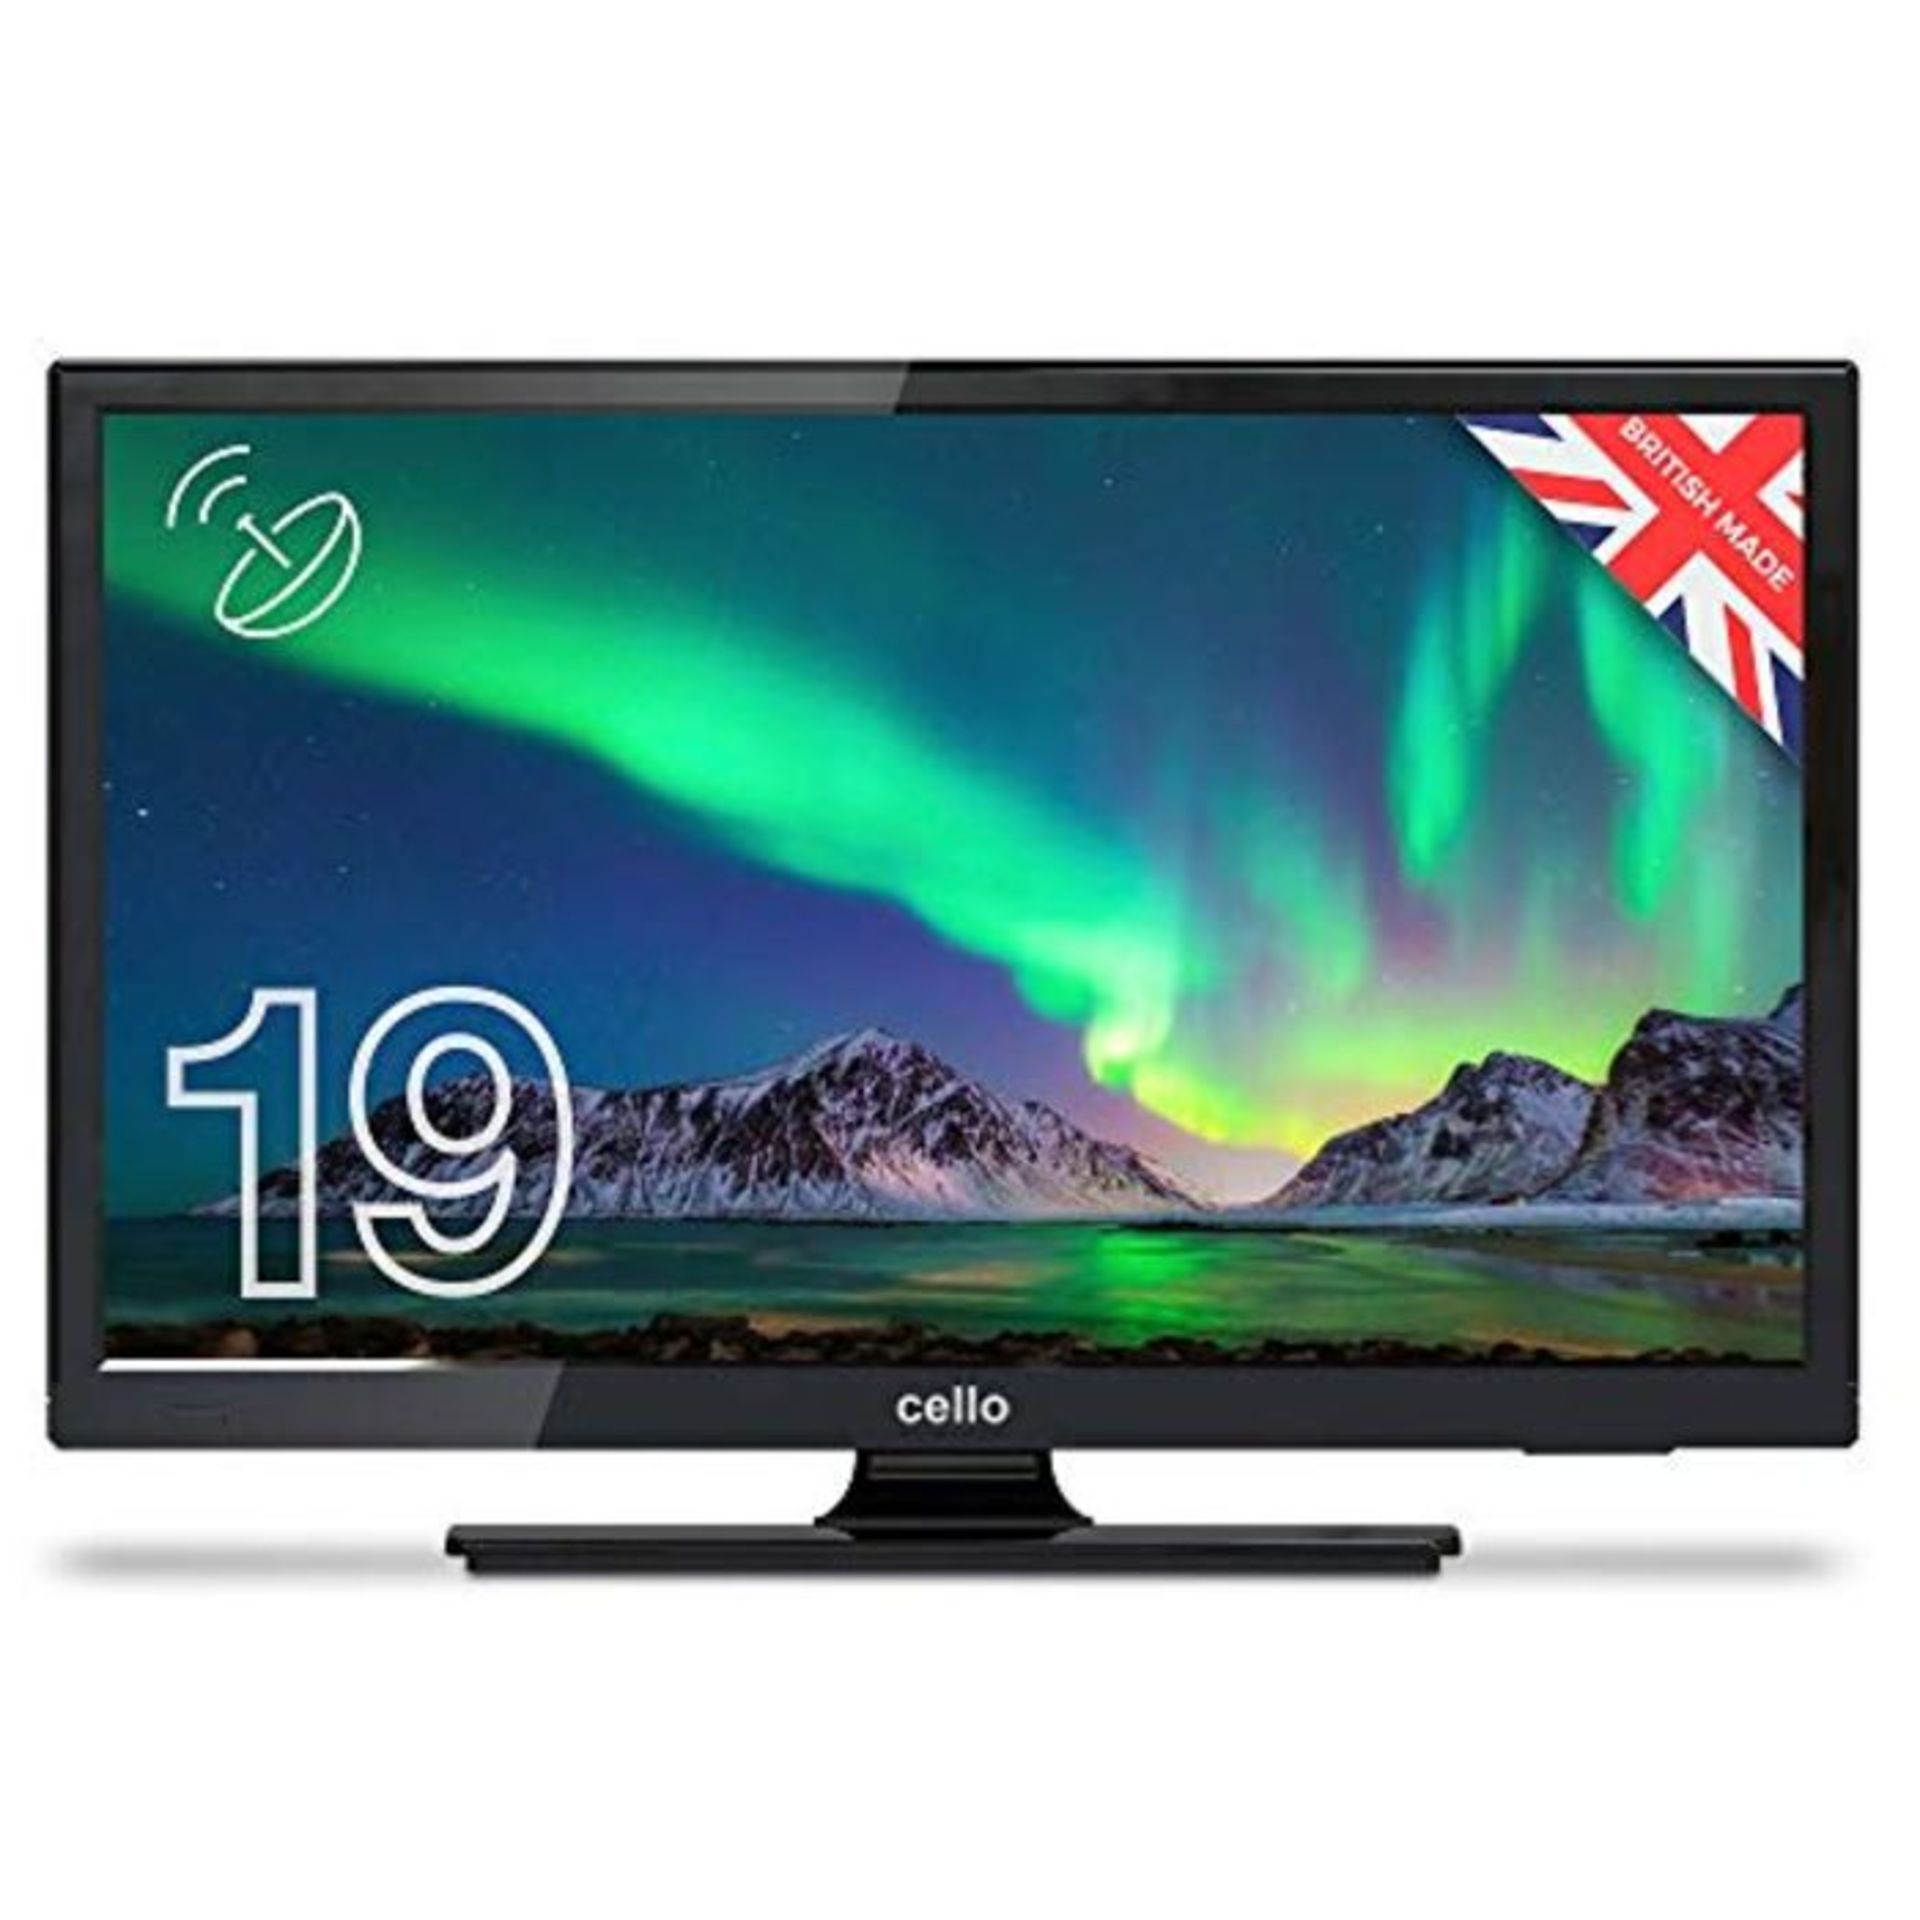 RRP £119.00 Cello ZSO291 193 Digital LED TV with Freeview and Built In Satellite Tuner , Black